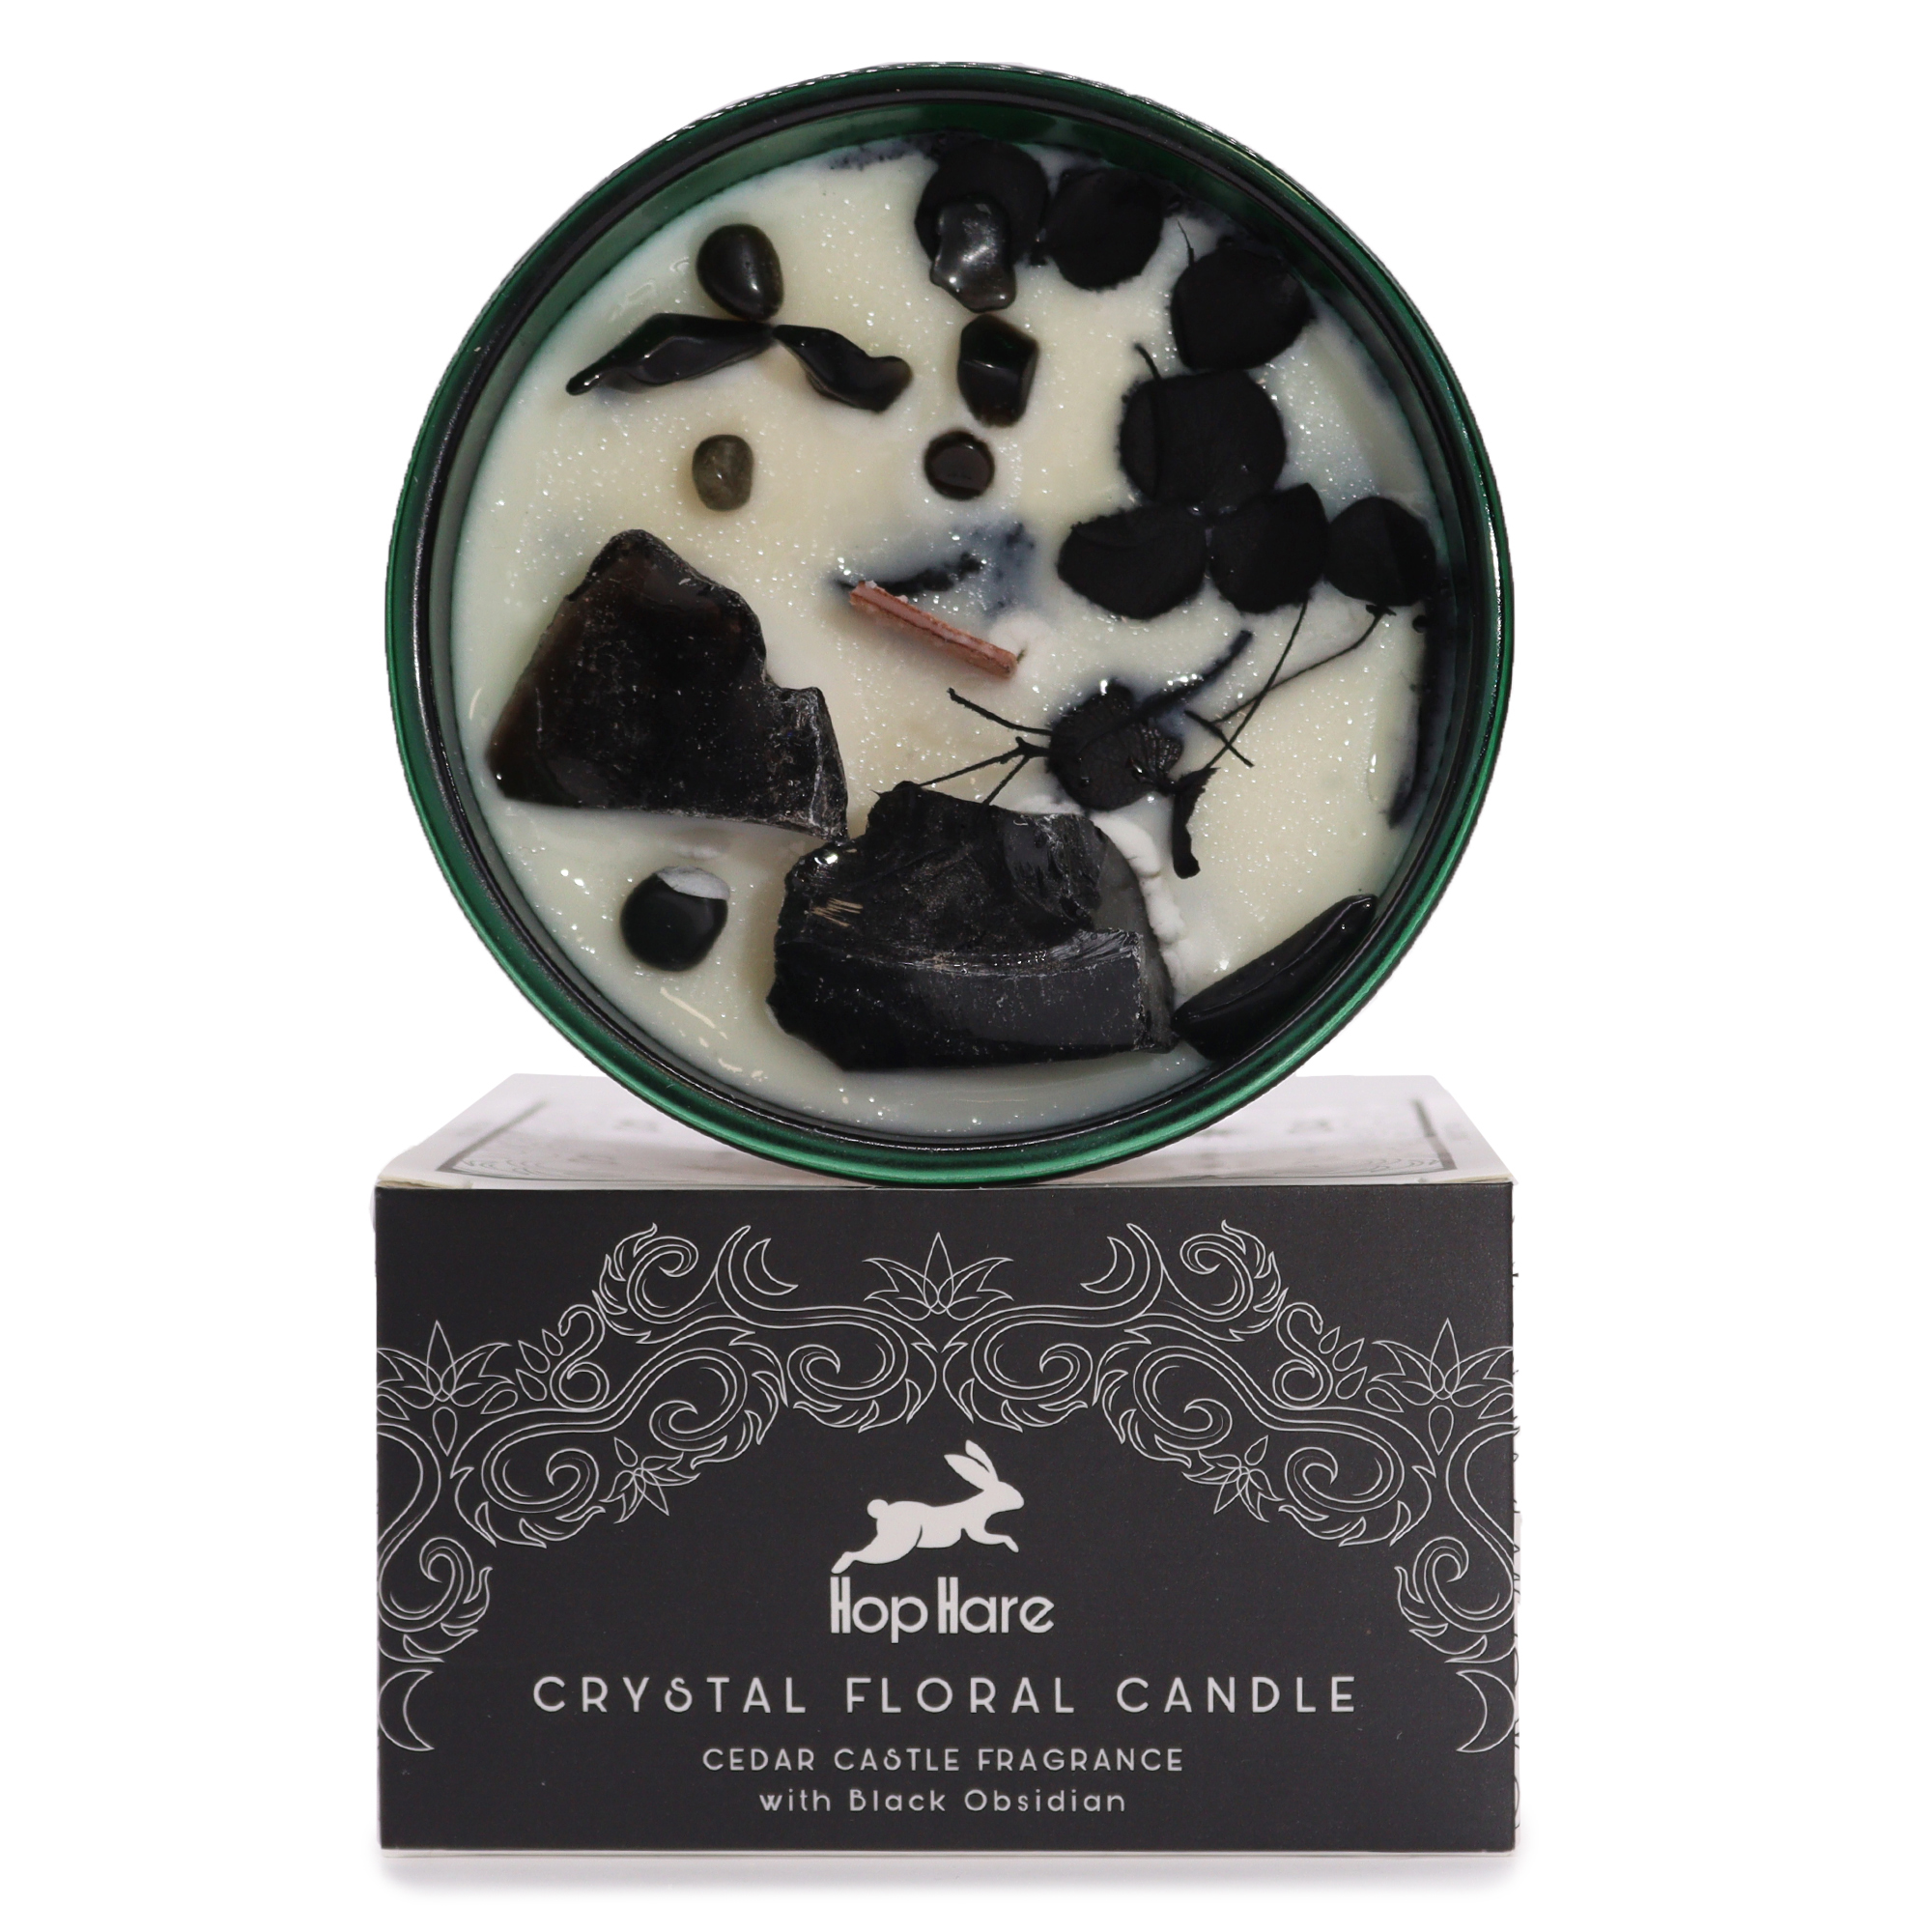 Hop Hare Crystal Magic Flower Candle - The Knight of Swords